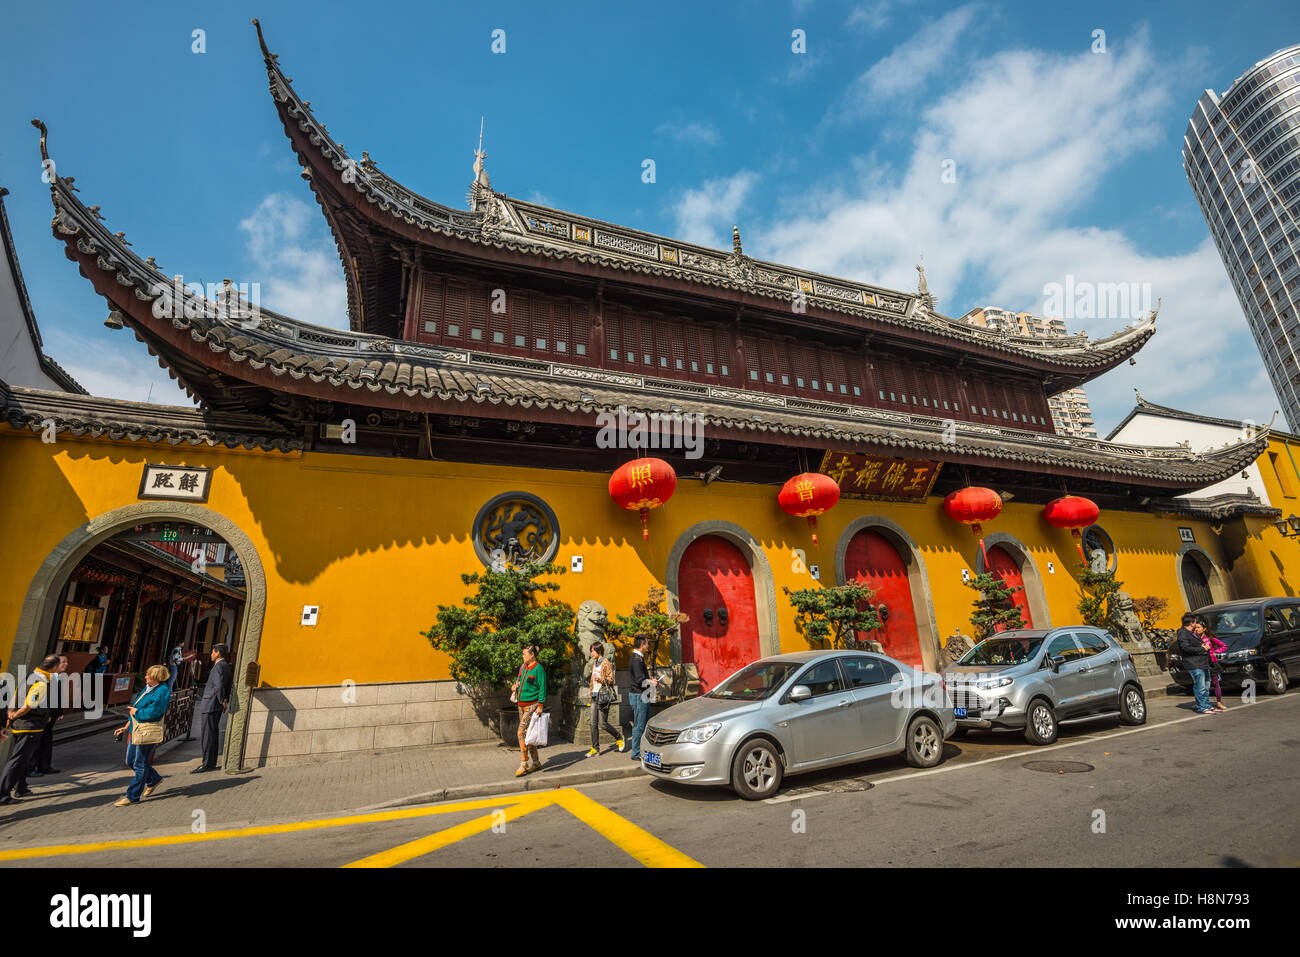 A wide-angle view of the Jade Buddha Temple exterior (founded 1882) in Shanghai, China Stock Photo